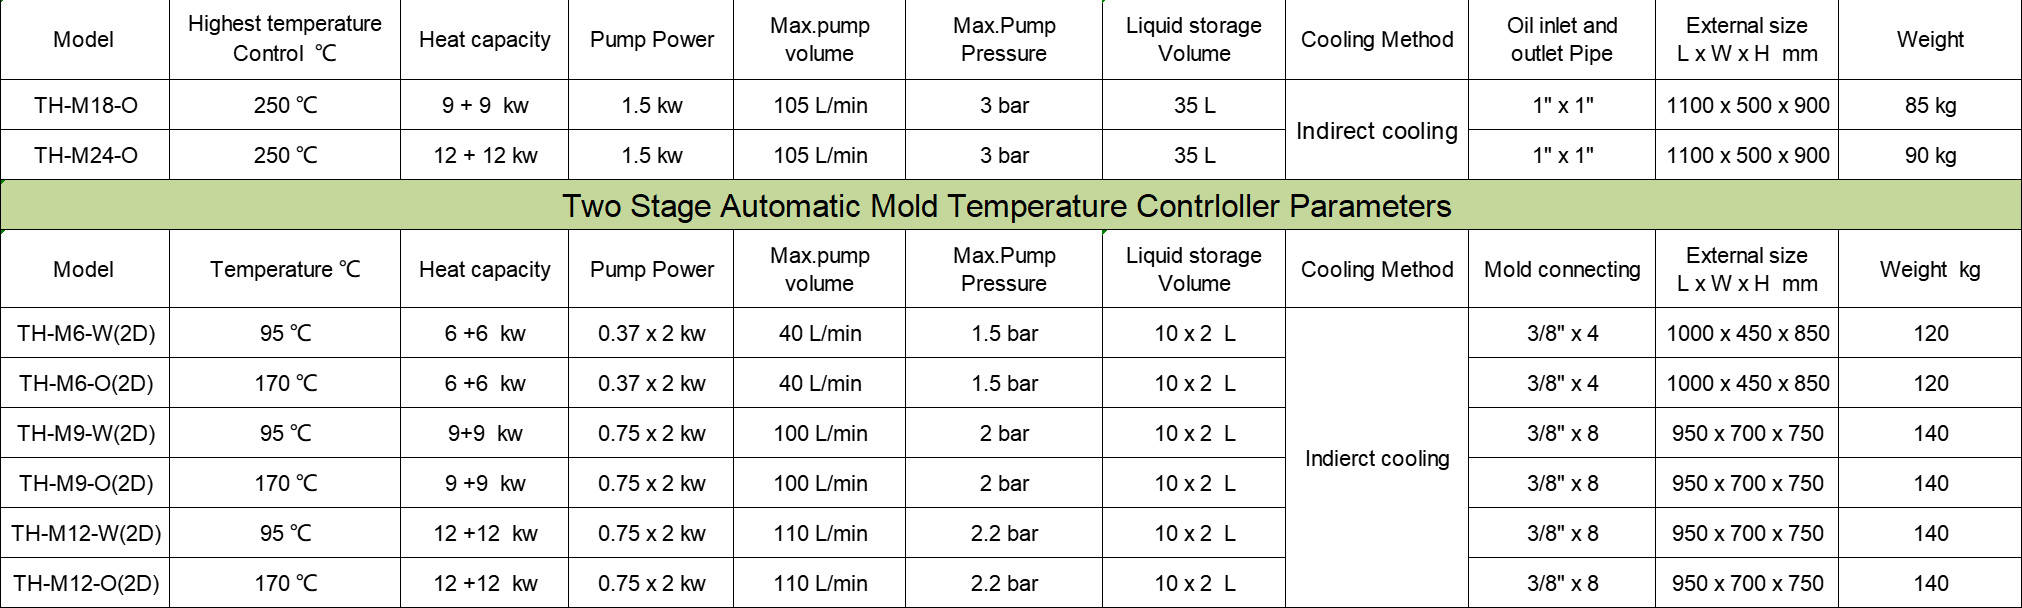 Two Stage Automatic Mold Temperature Controller Parameters